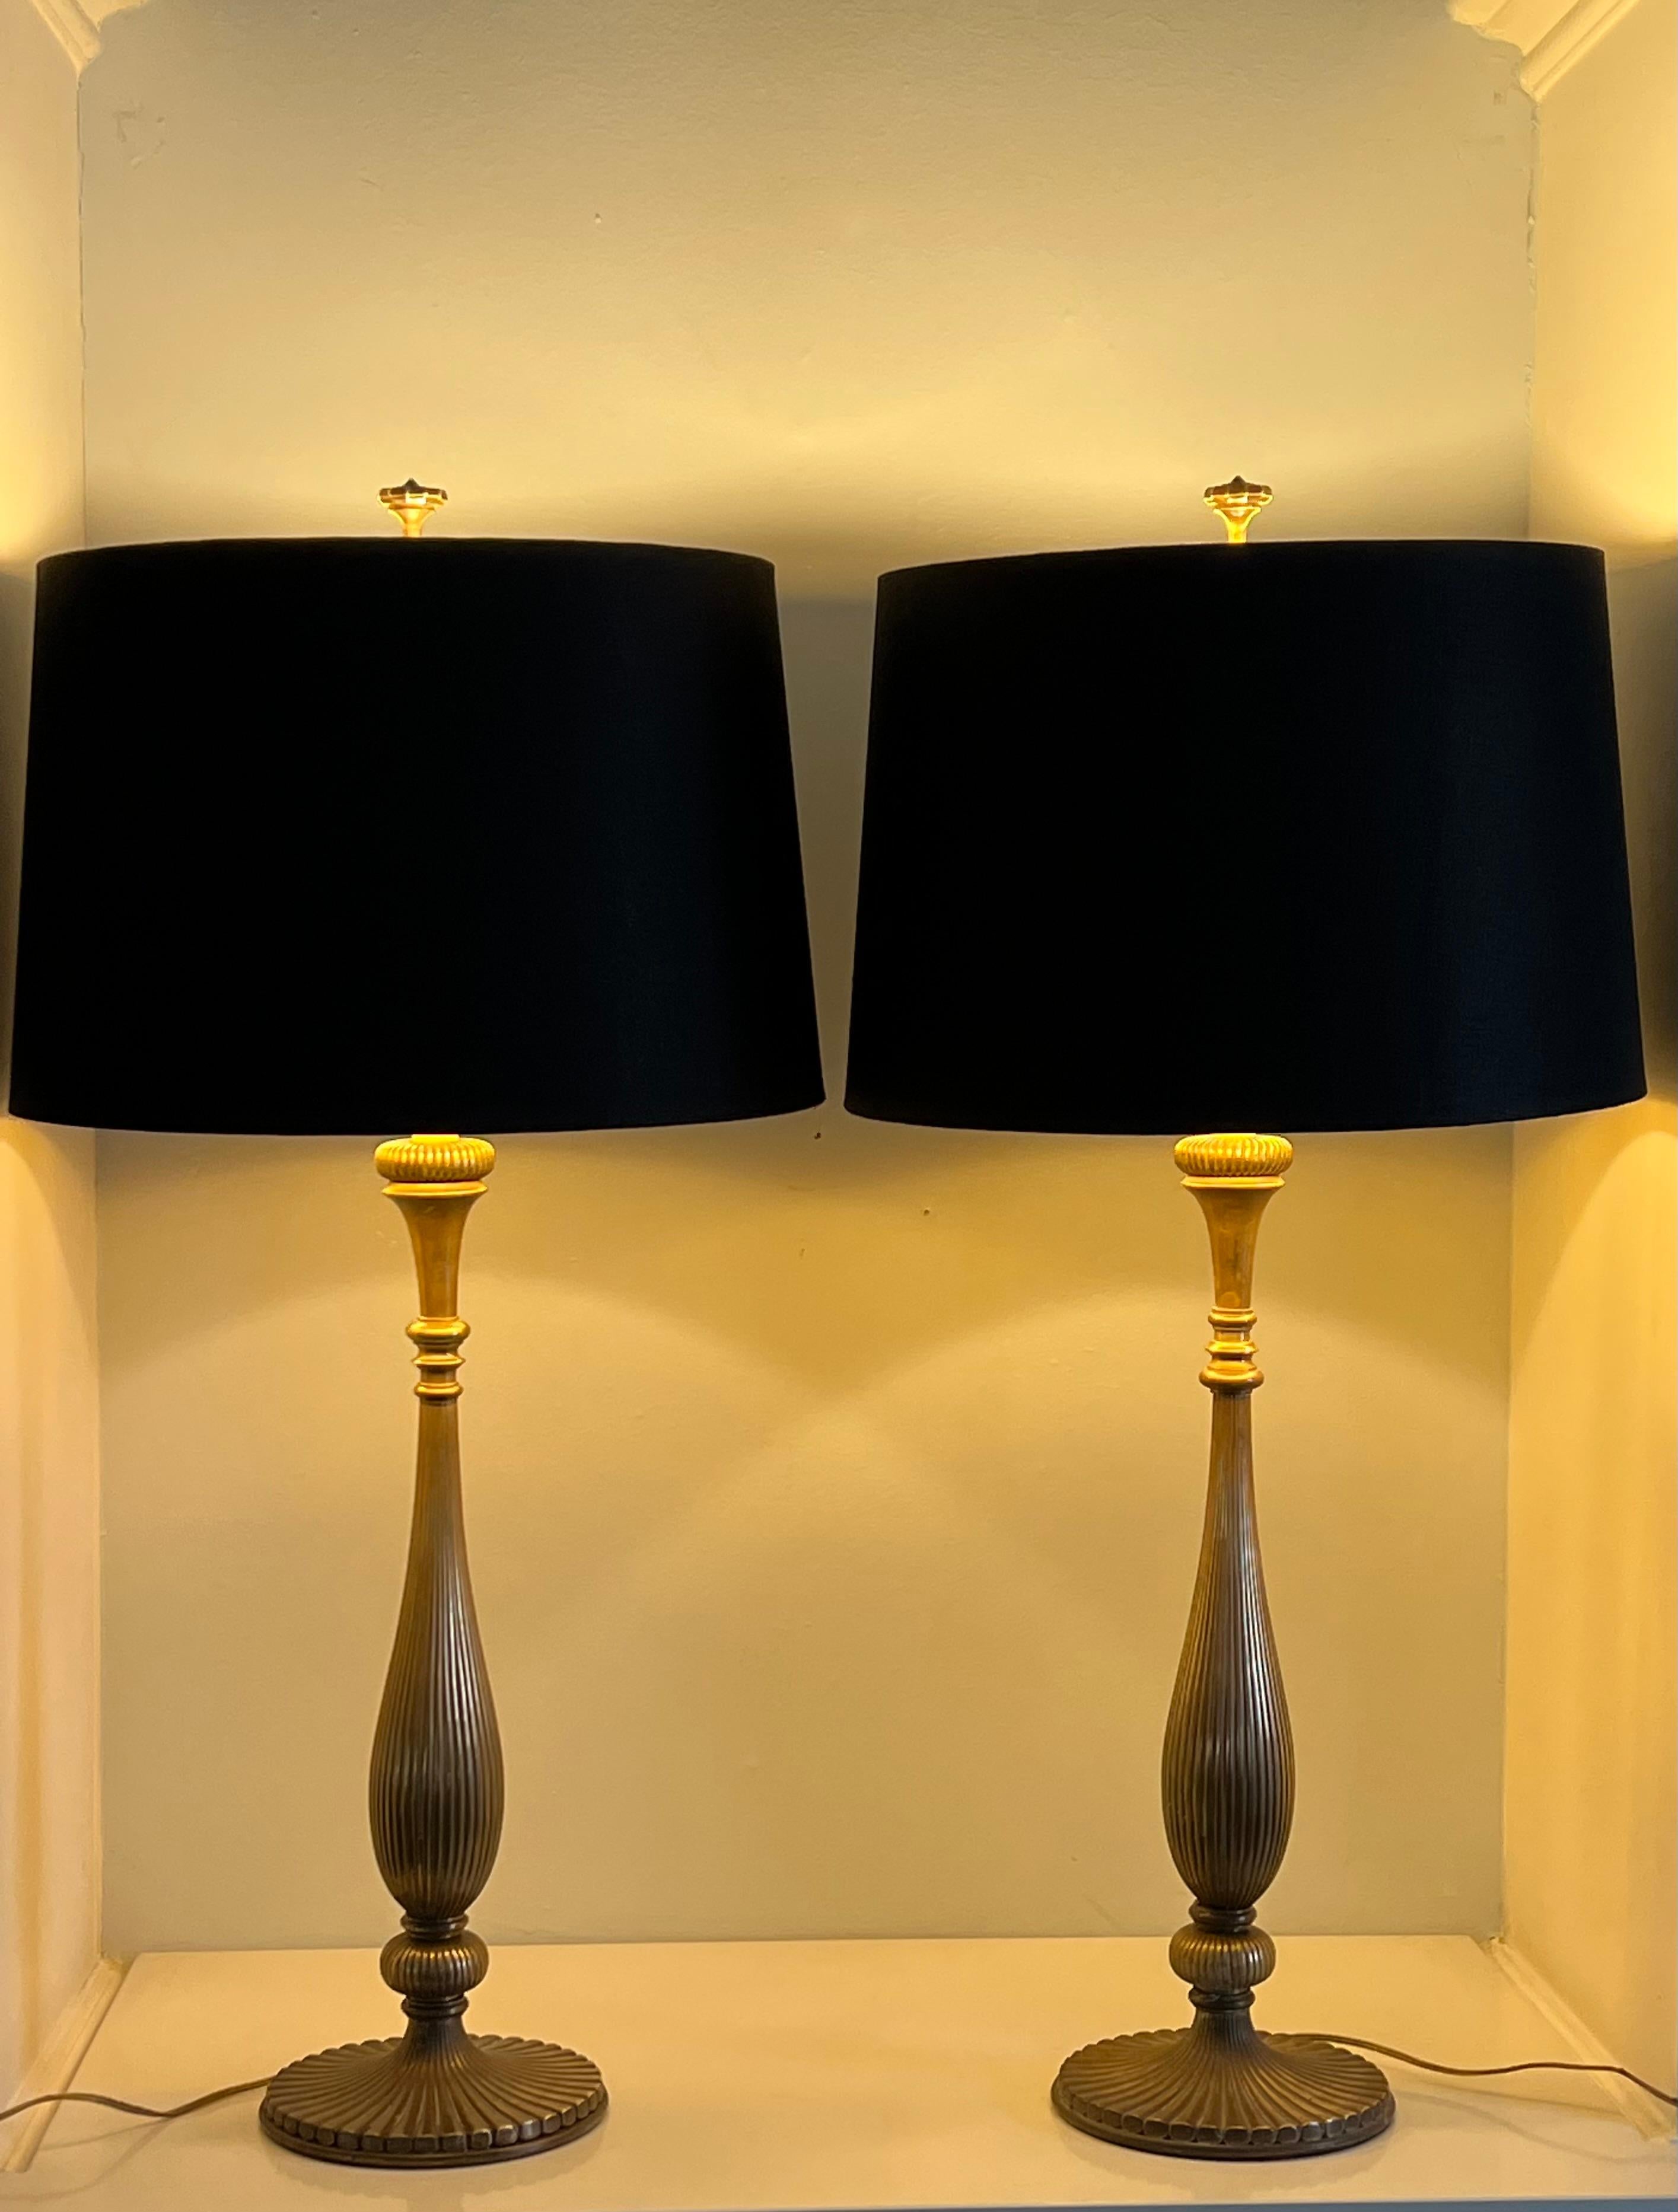 A wonderful pair of brass Chapman lamps. Iconic mid century lamps with a ribbed brass candlestick style body. Quite impressive and sturdy. The shades have a gold foil lining which makes for a very nice ambient glow. One center socket per lamp.